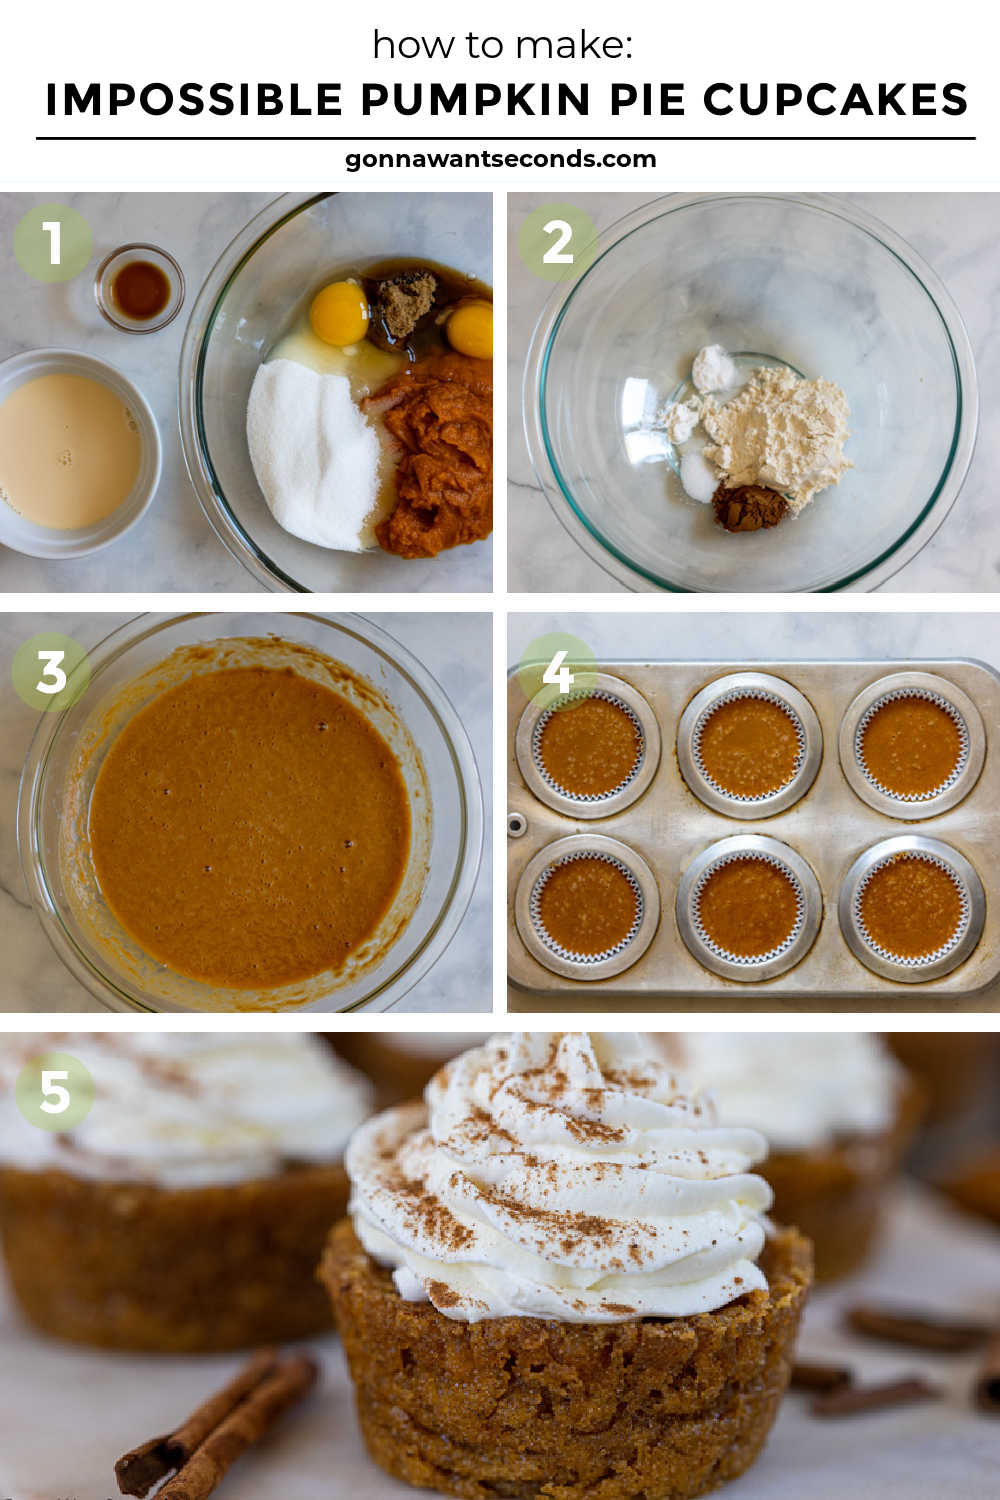 Step by step how to make impossible pumpkin pie cupcakes